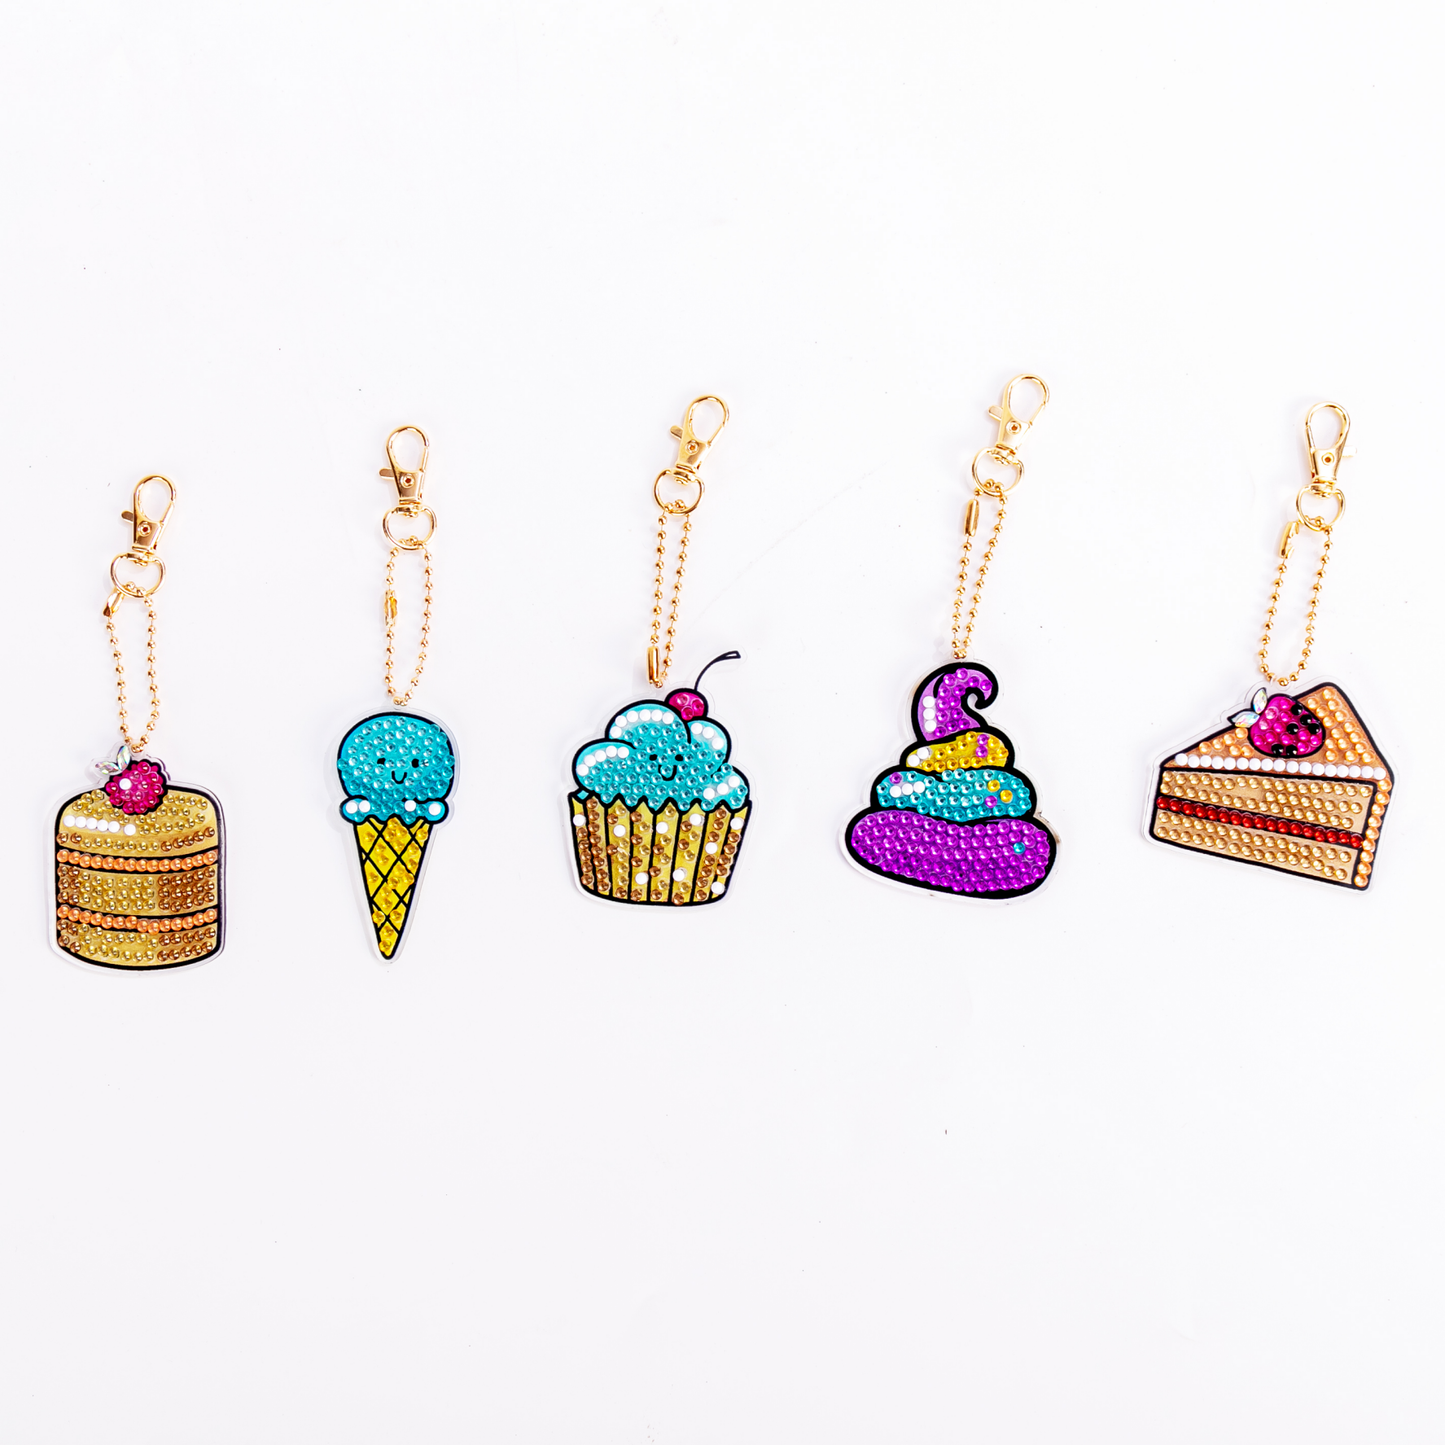 One-sided sticker special diamond painted keychain key ring-Ice cream